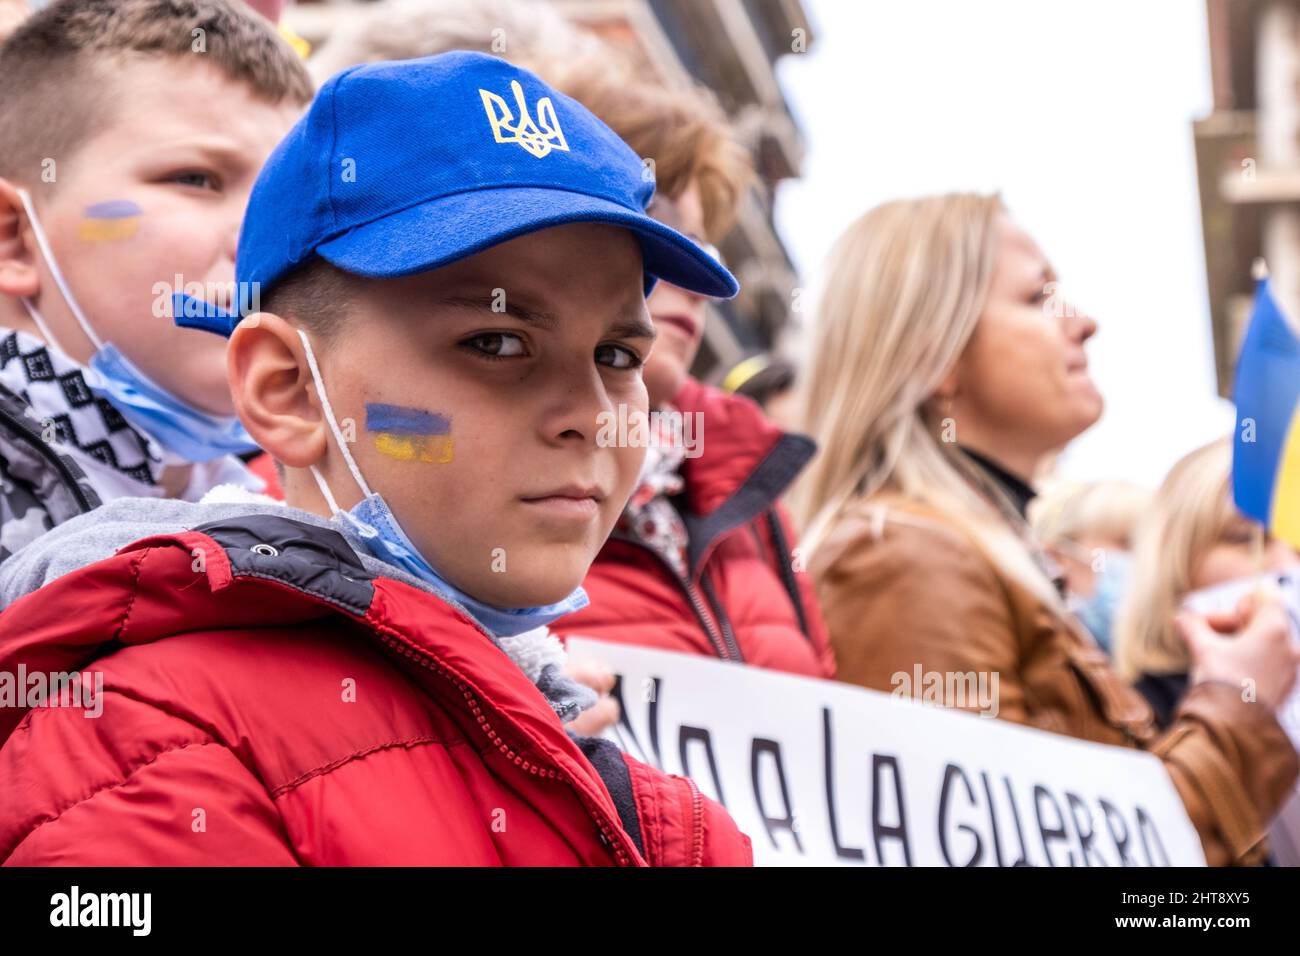 Valencia, Spain; 27th Feb 2022: Demonstrators protest against the war during a demonstration against Russia's invasion of Ukraine. Some children were also present. Credit: Media+Media/Alamy Live News Stock Photo